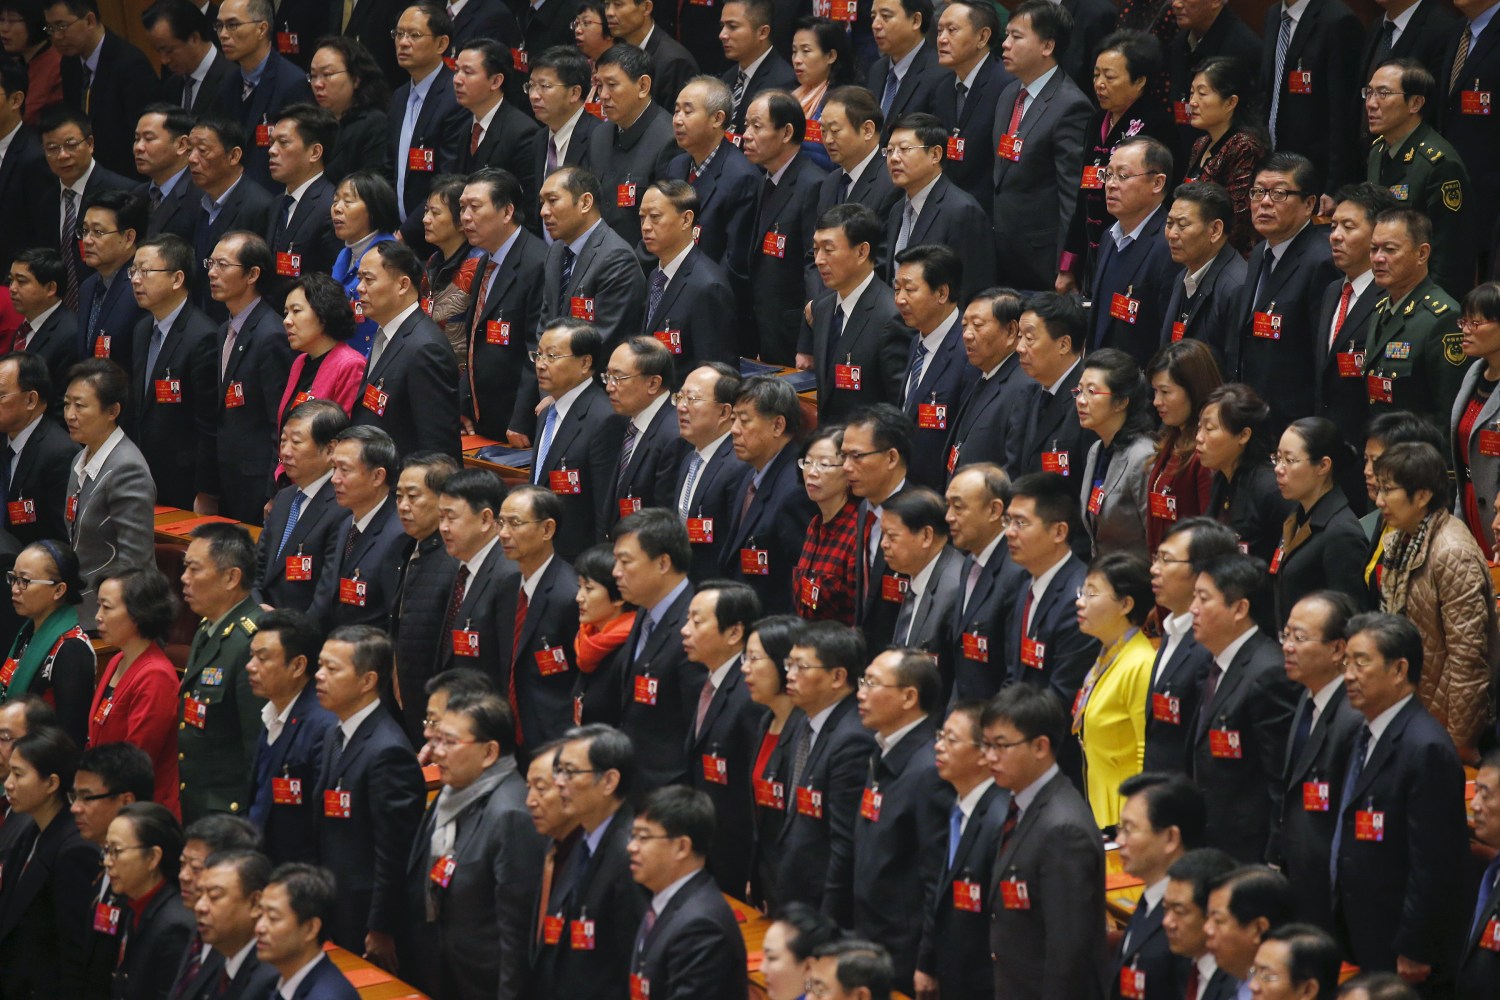 Delegates sing China's national anthem during the closing ceremony of China's National People's Congress at the Great Hall of the People in Beijing